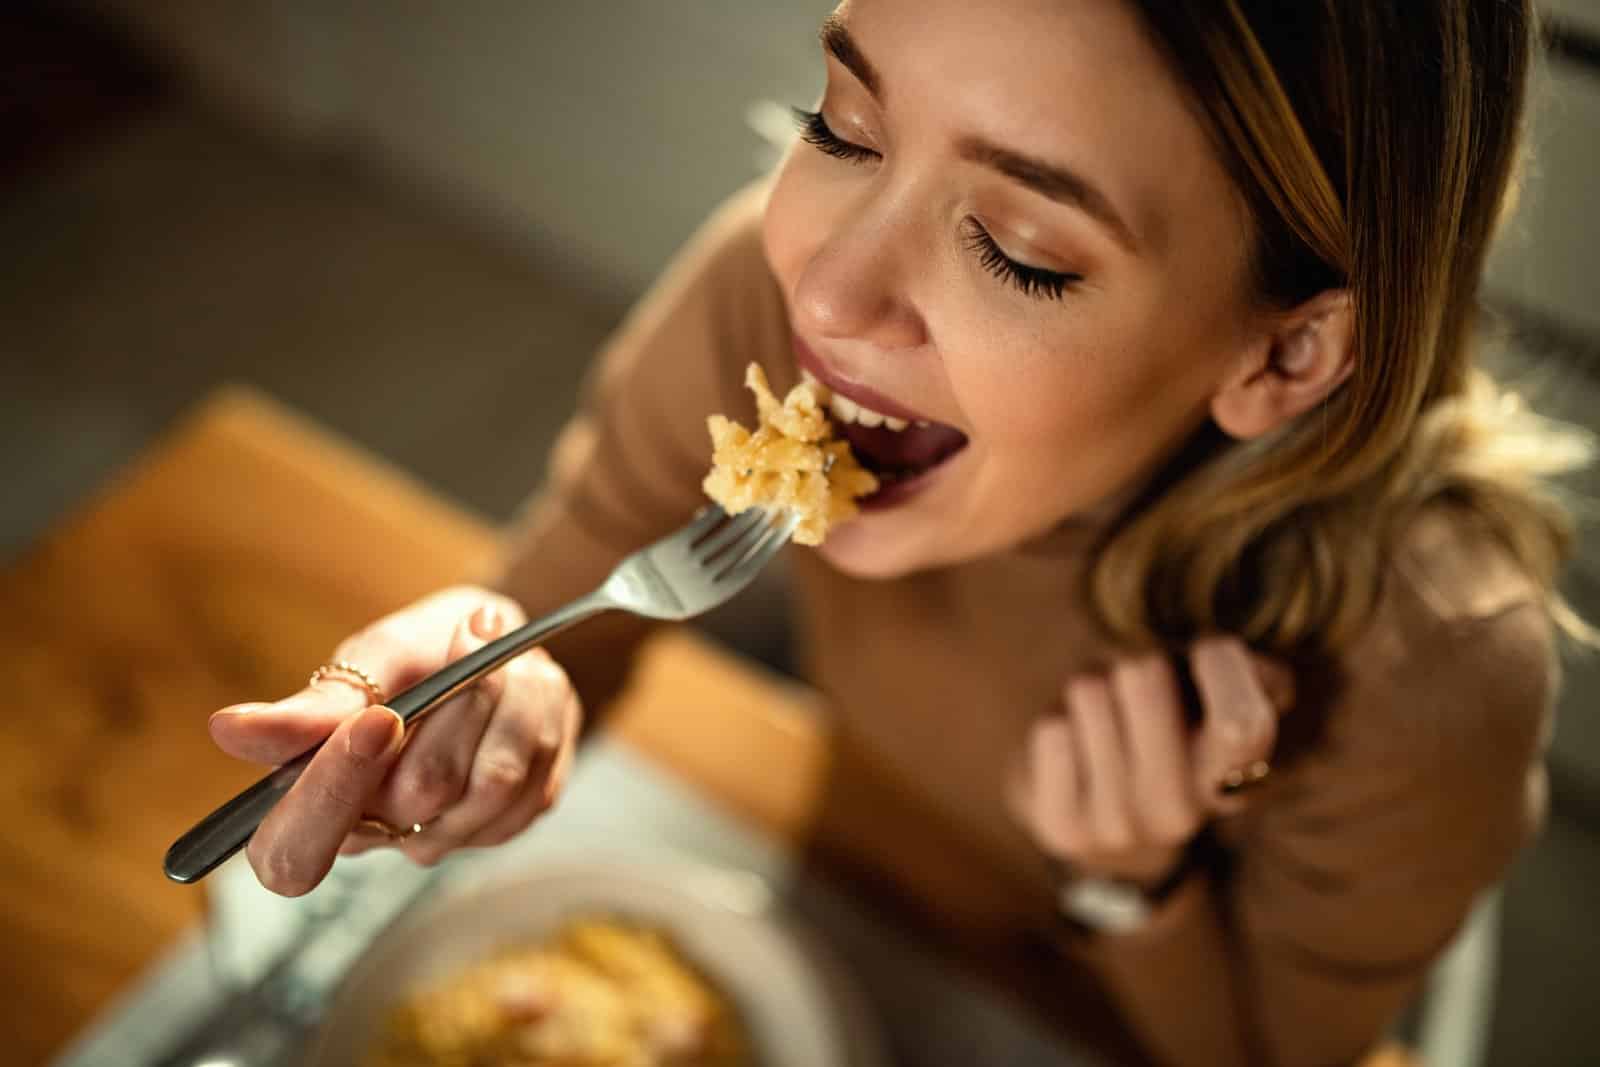 <p class="wp-caption-text">Image Credit: Shutterstock / Drazen Zigic</p>  <p><span>Whether you’re sad, stressed, or just plain hungry, comfort food is always there to save the day.</span></p>